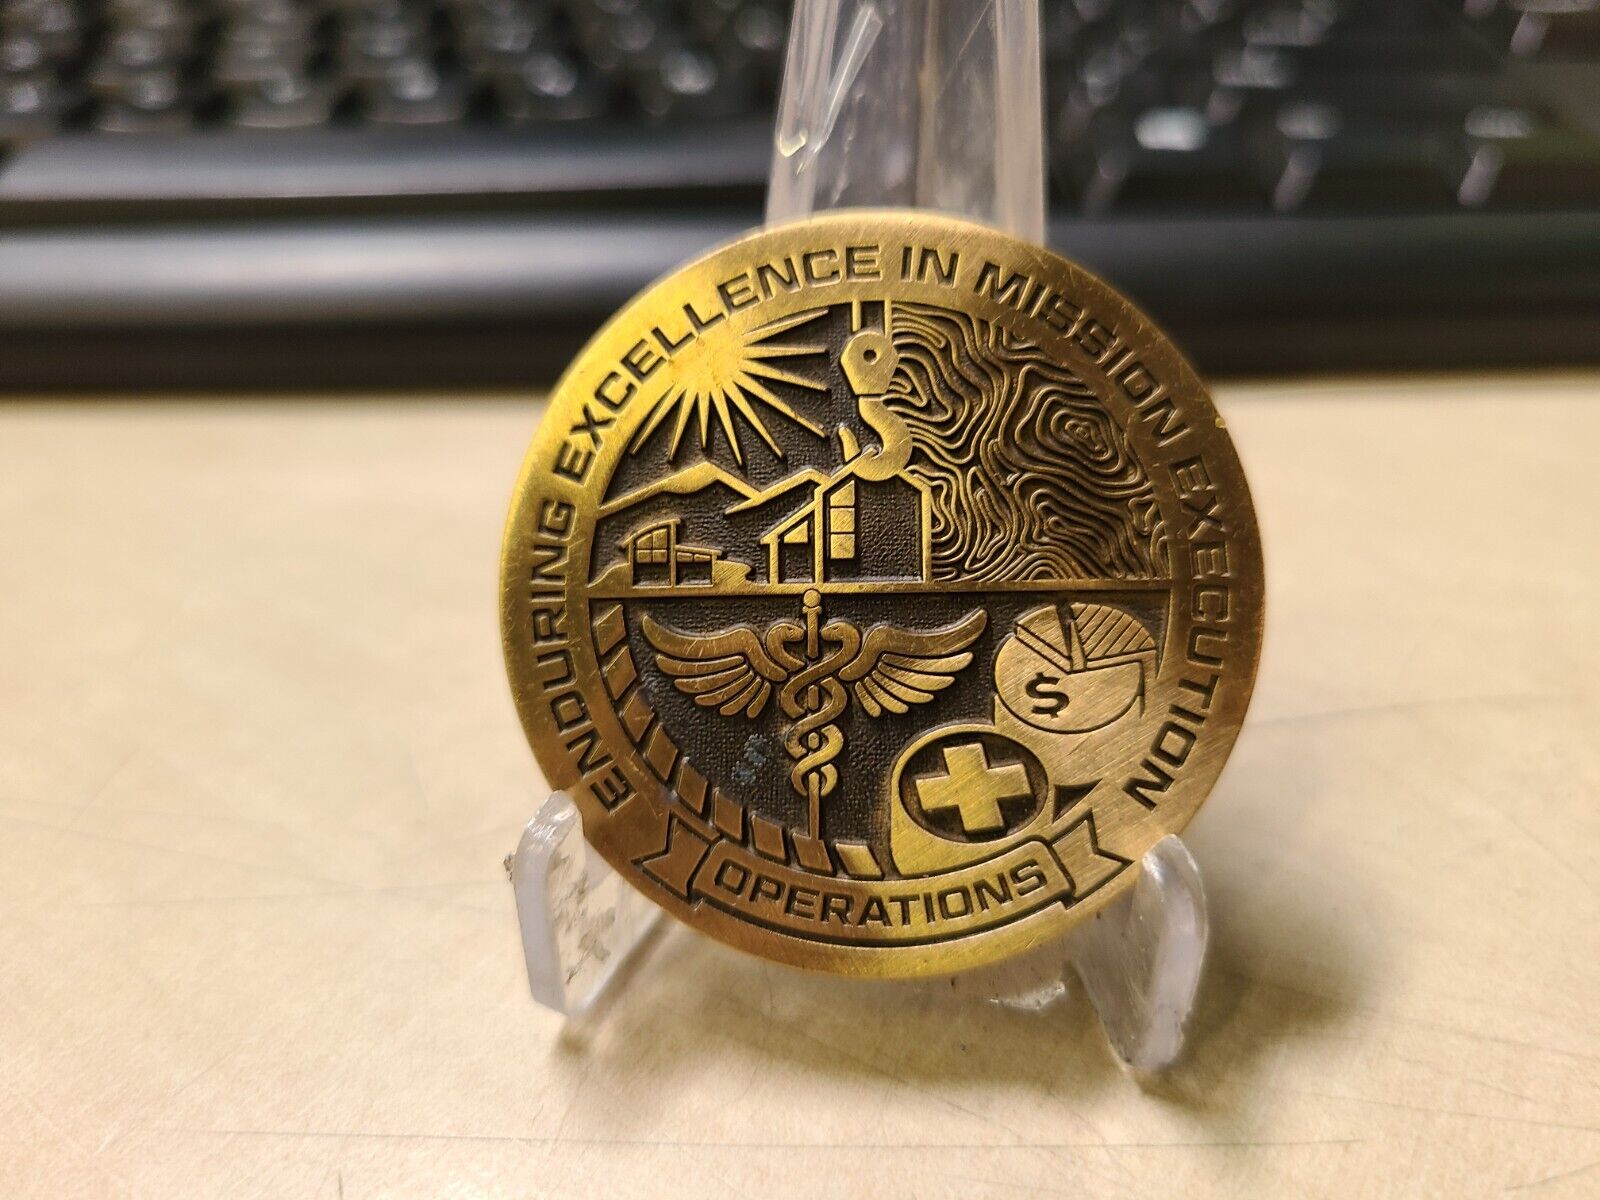 Los Alamos National Laboratory Partnering For Mission Delivery Challenge Coin